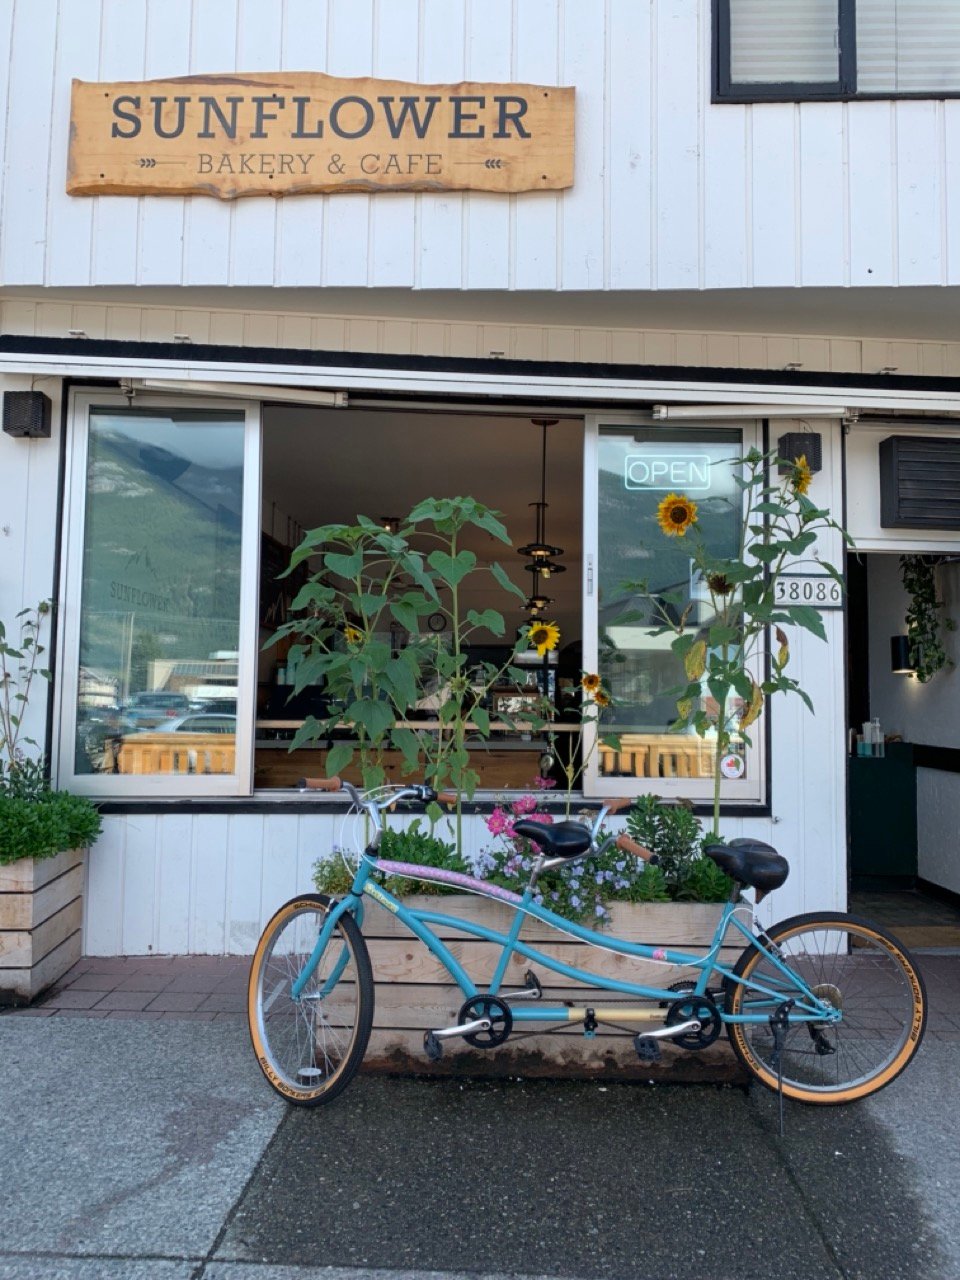 The exterior of Sunflower Bakery in Squamish